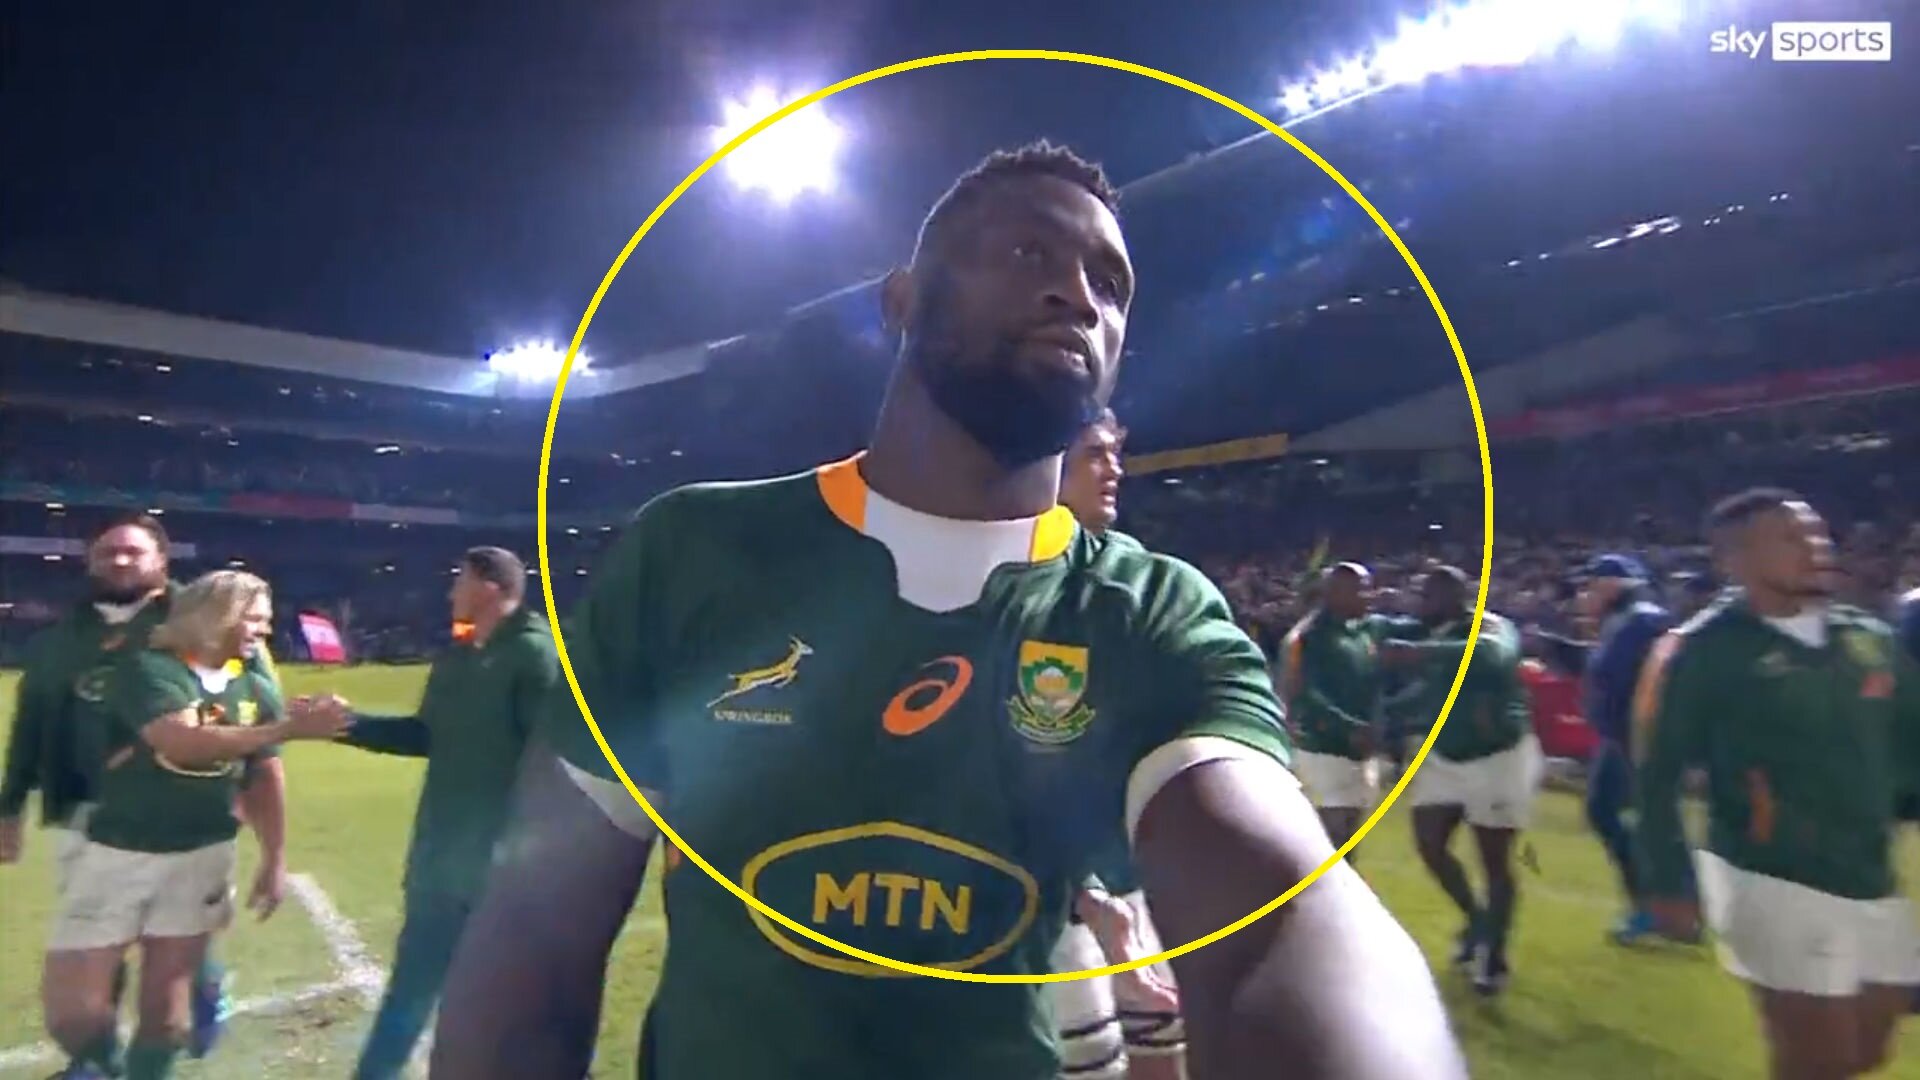 Springbok Kolisi lets himself down with final whistle incident